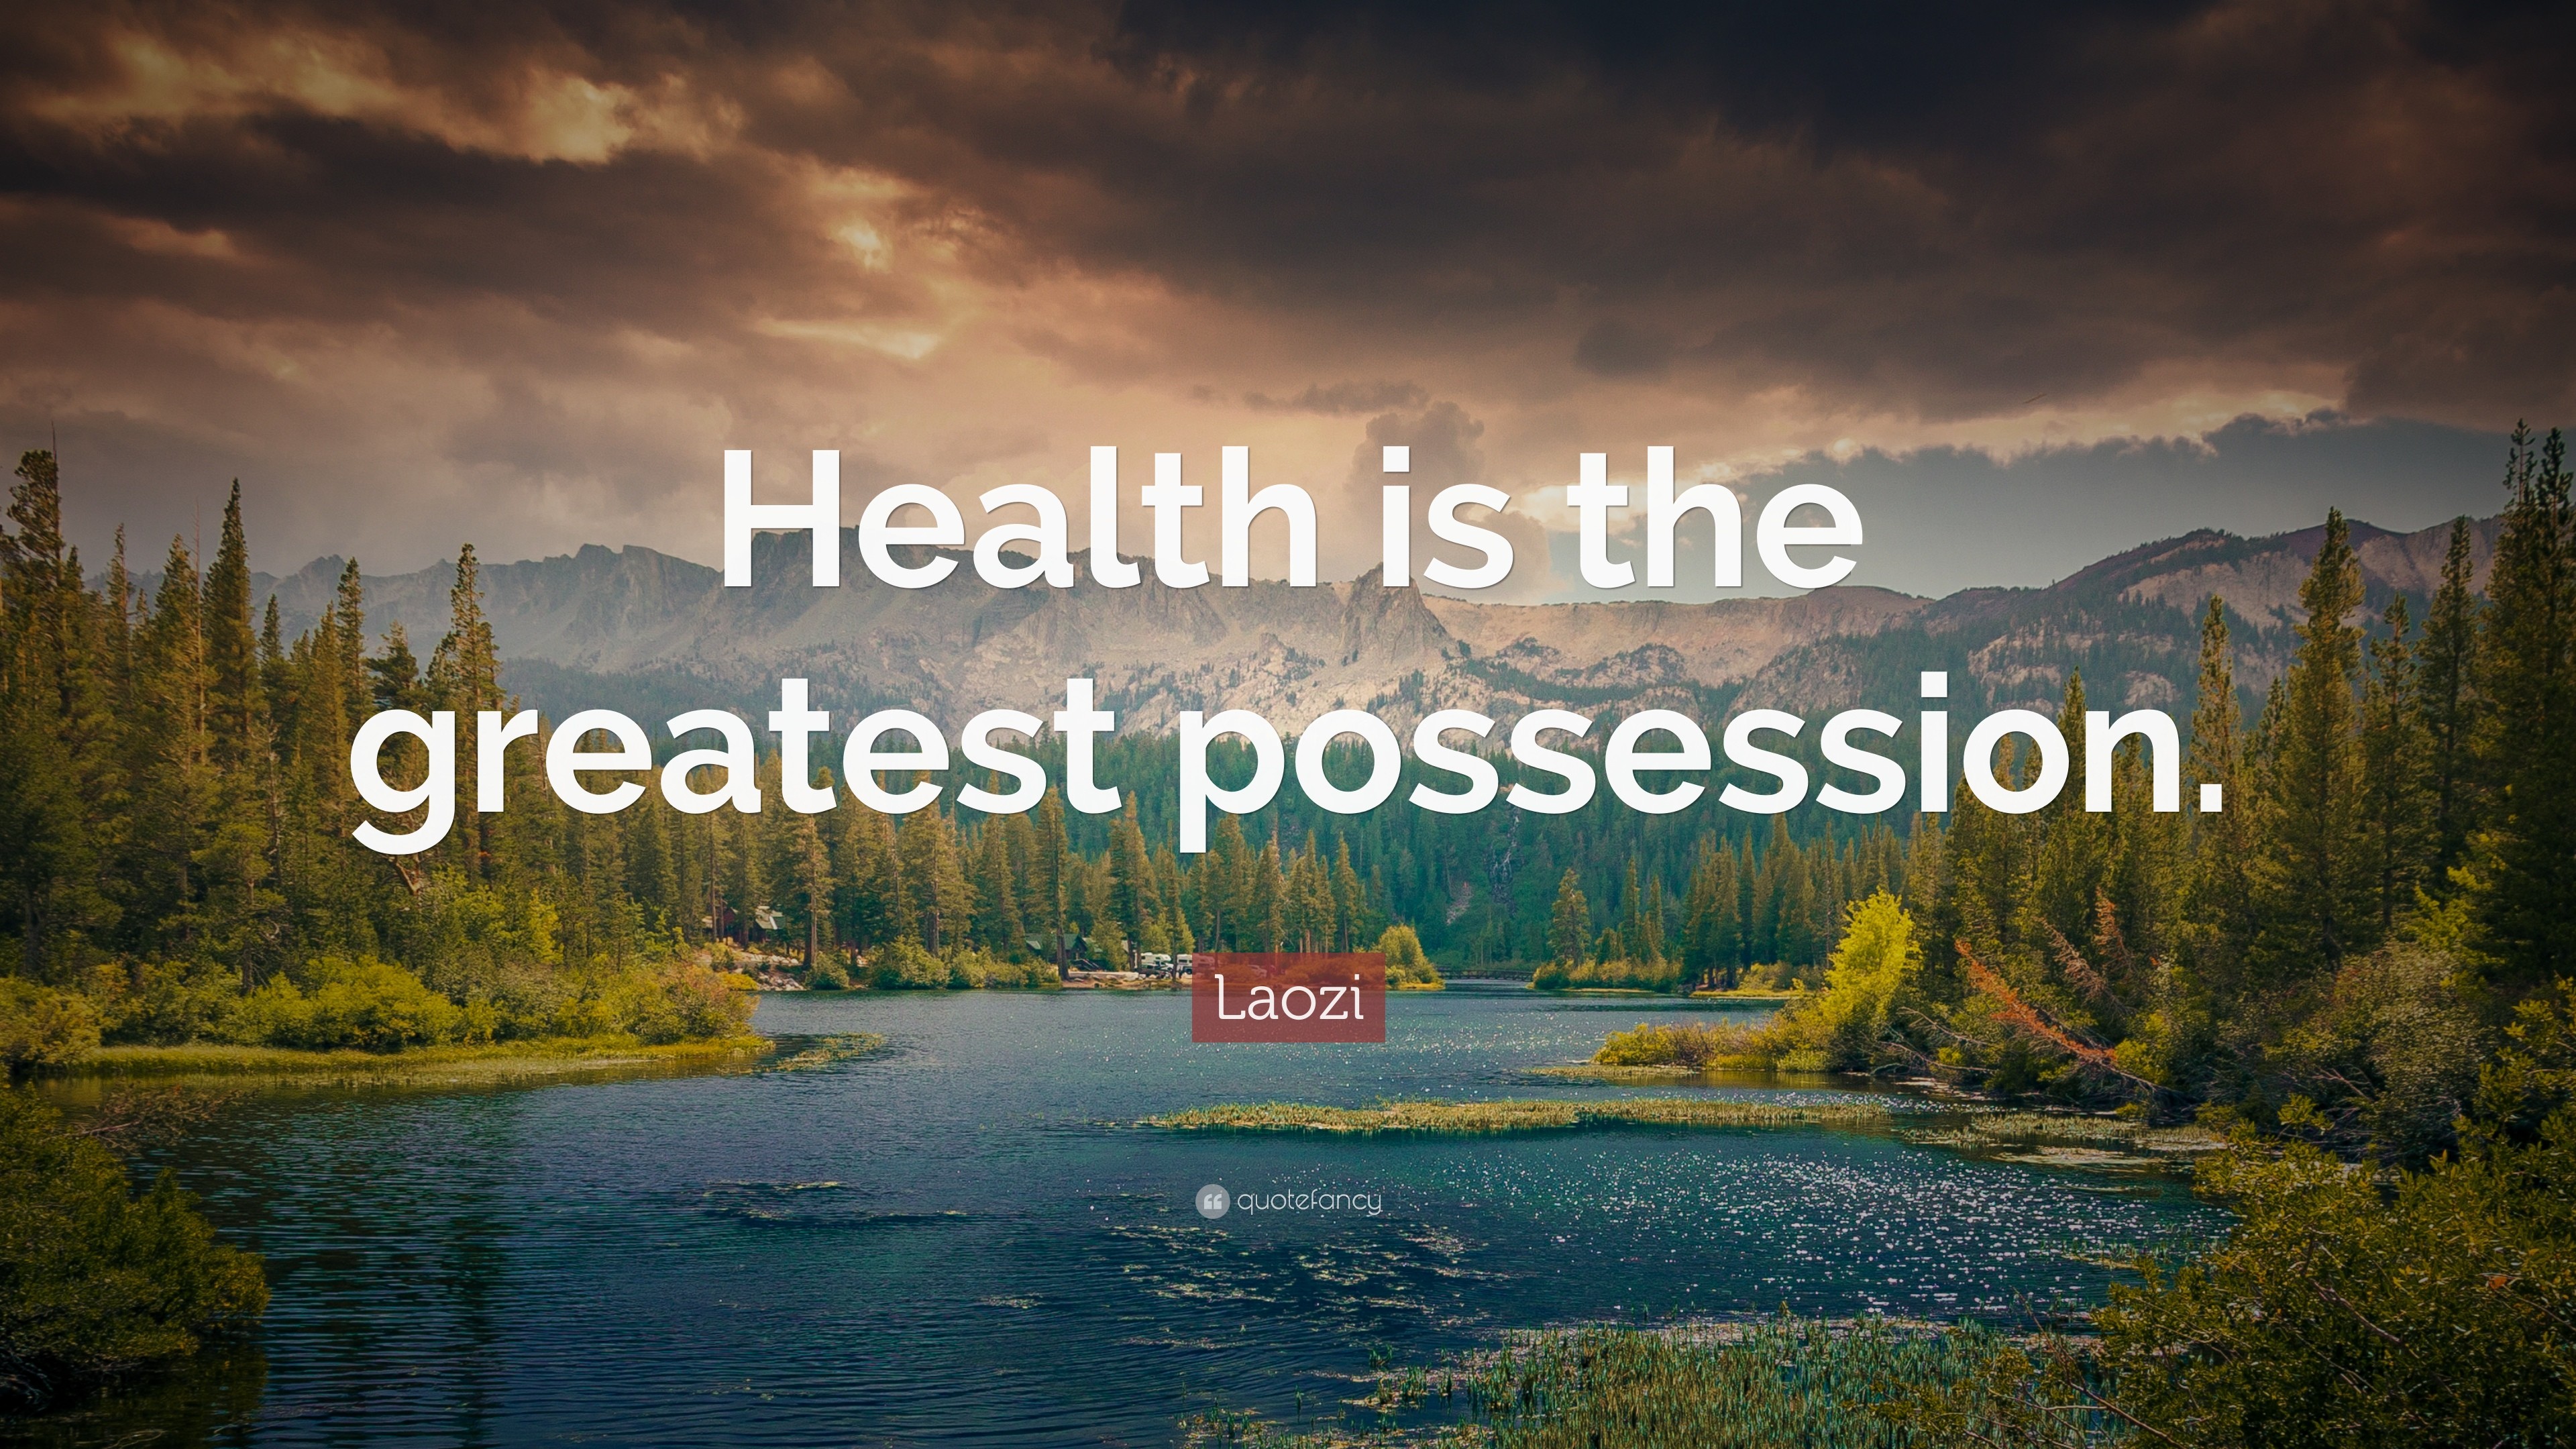 3840x2160 Health Quotes: “Health is the greatest possession.” — Laozi